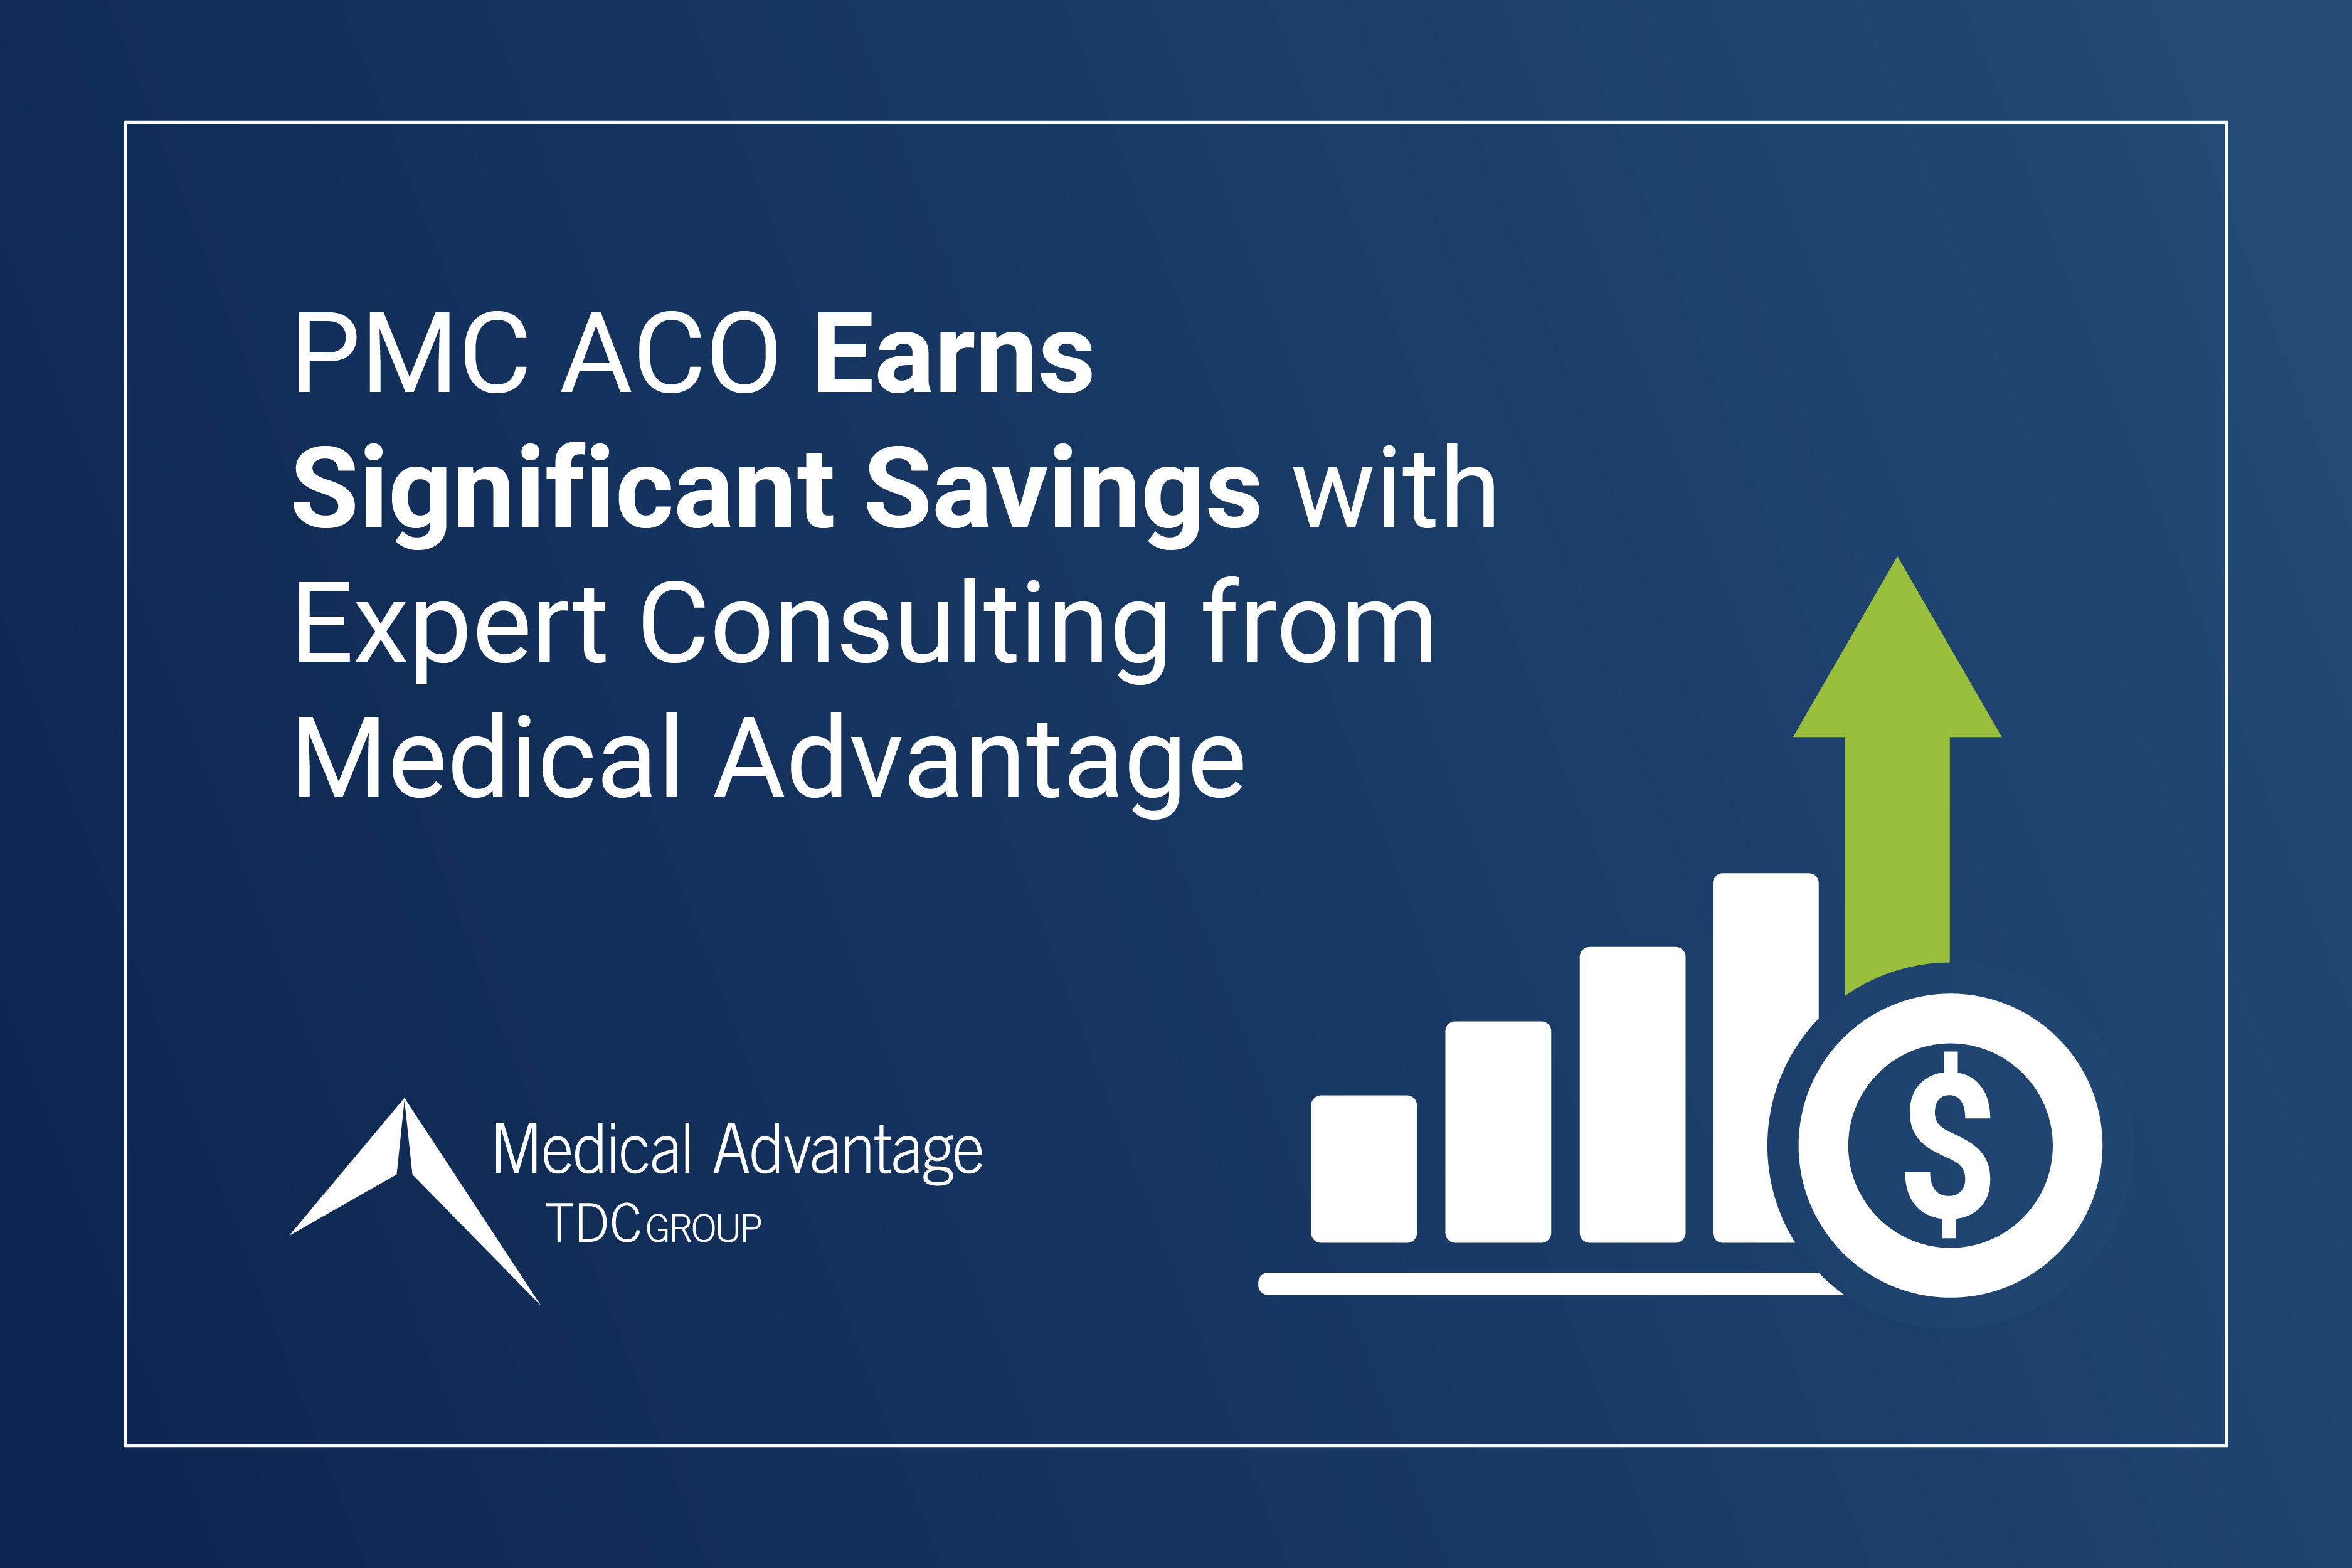 PCM ACO earns significant savings with expert consulting from Medical Advantage